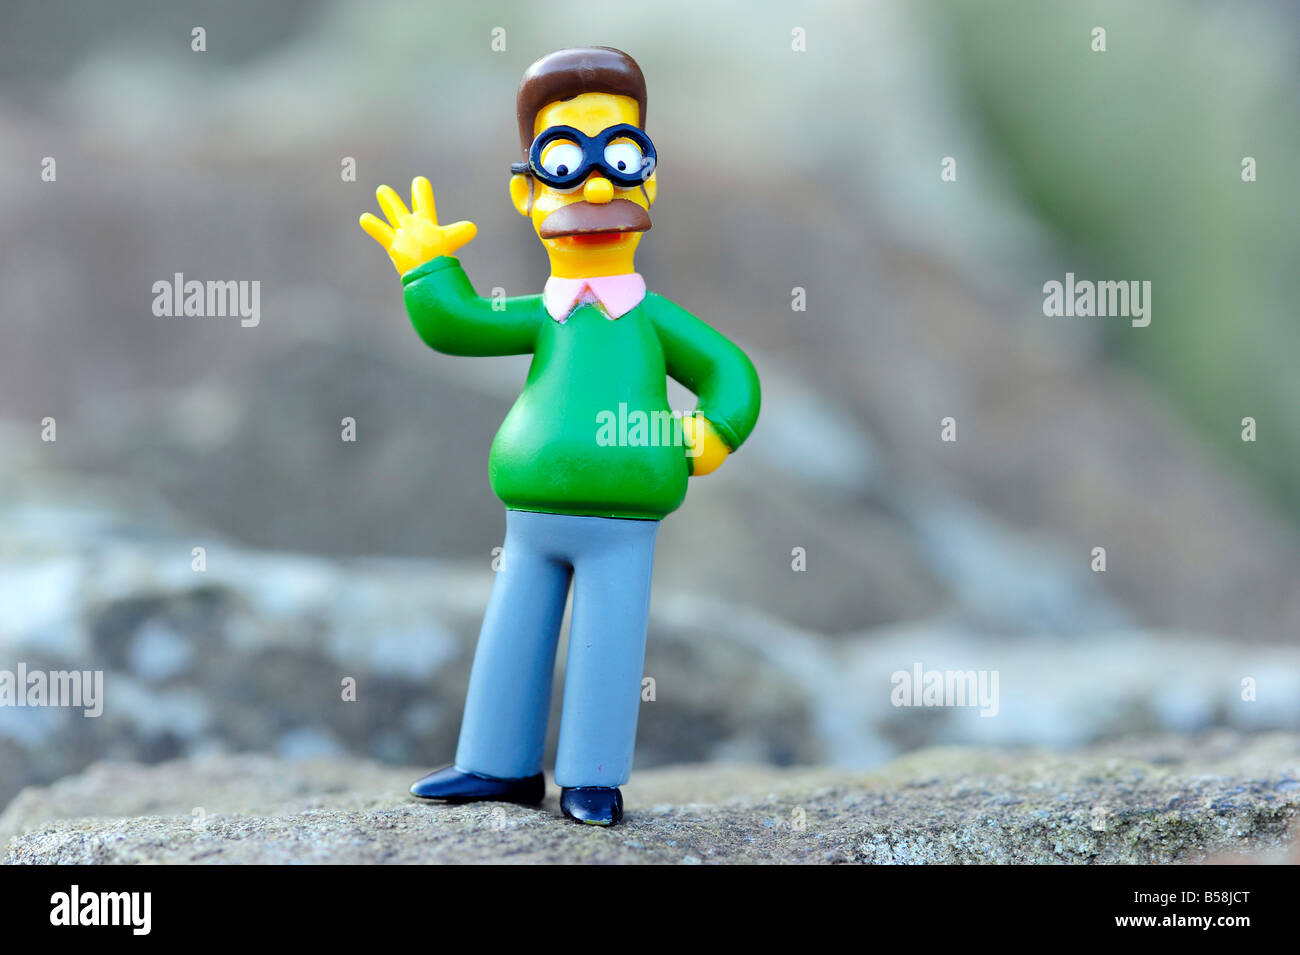 ned flanders simpsons homer's neighbour christian american character wave spectacles glasses man male usa toy model dweeb geek Stock Photo